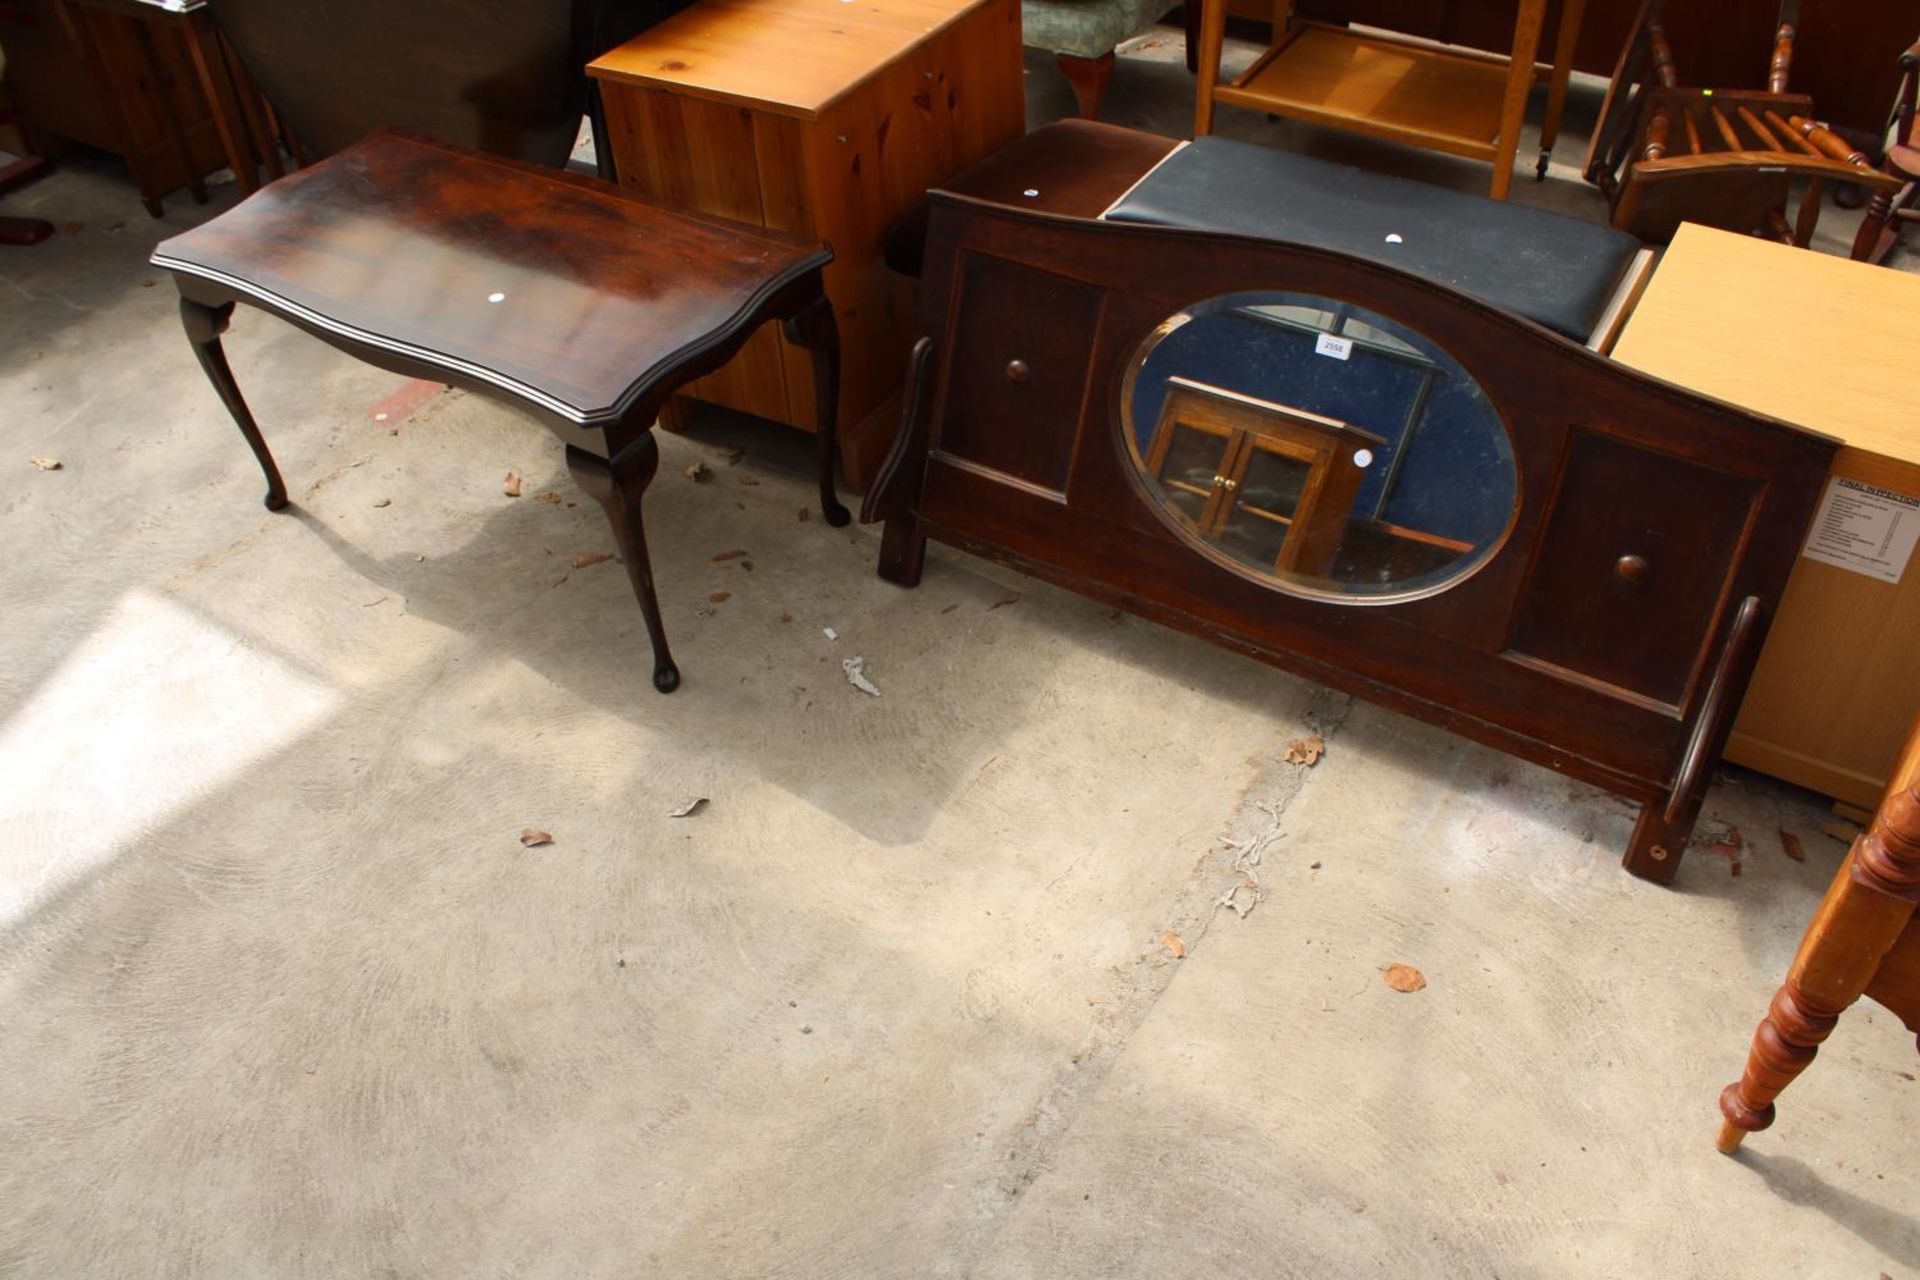 A MODERN COFFEE TABLE AND SIDEBOARD MIRROR BACK